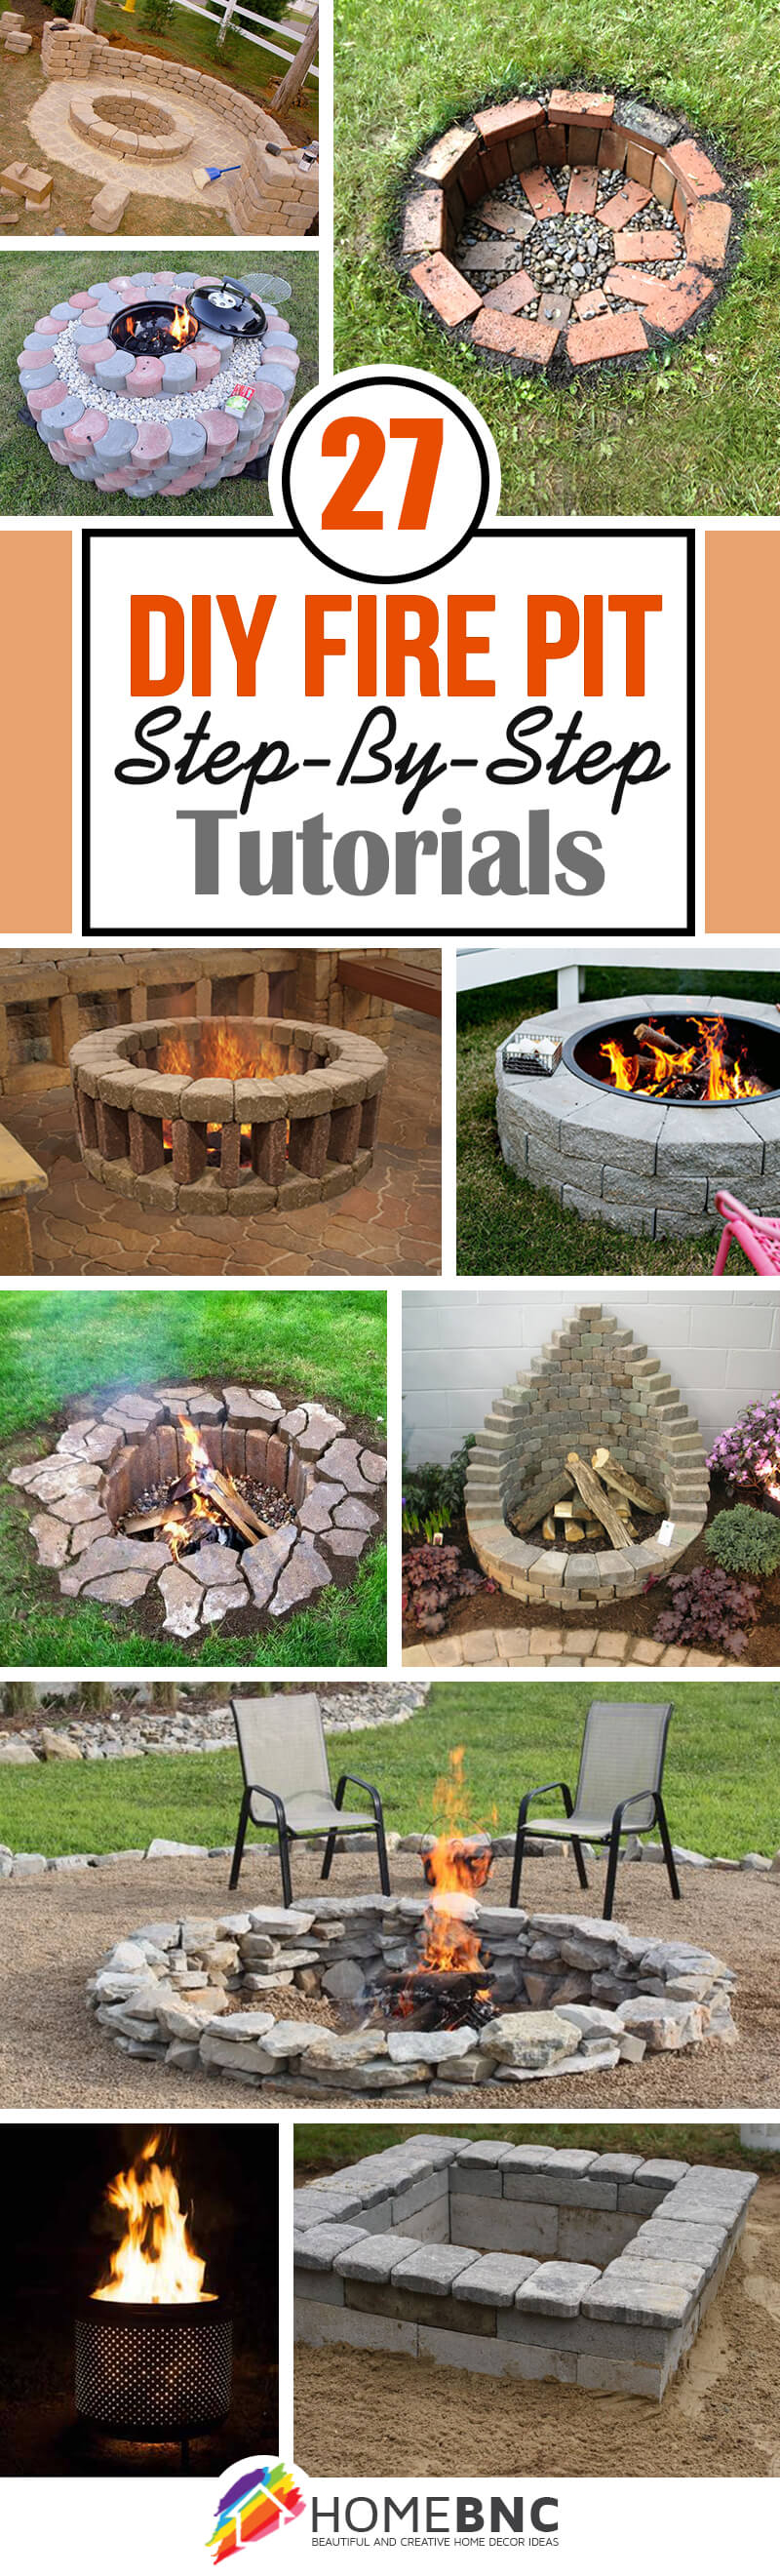 27 Best Diy Firepit Ideas And Designs, Make Your Own Fire Pit